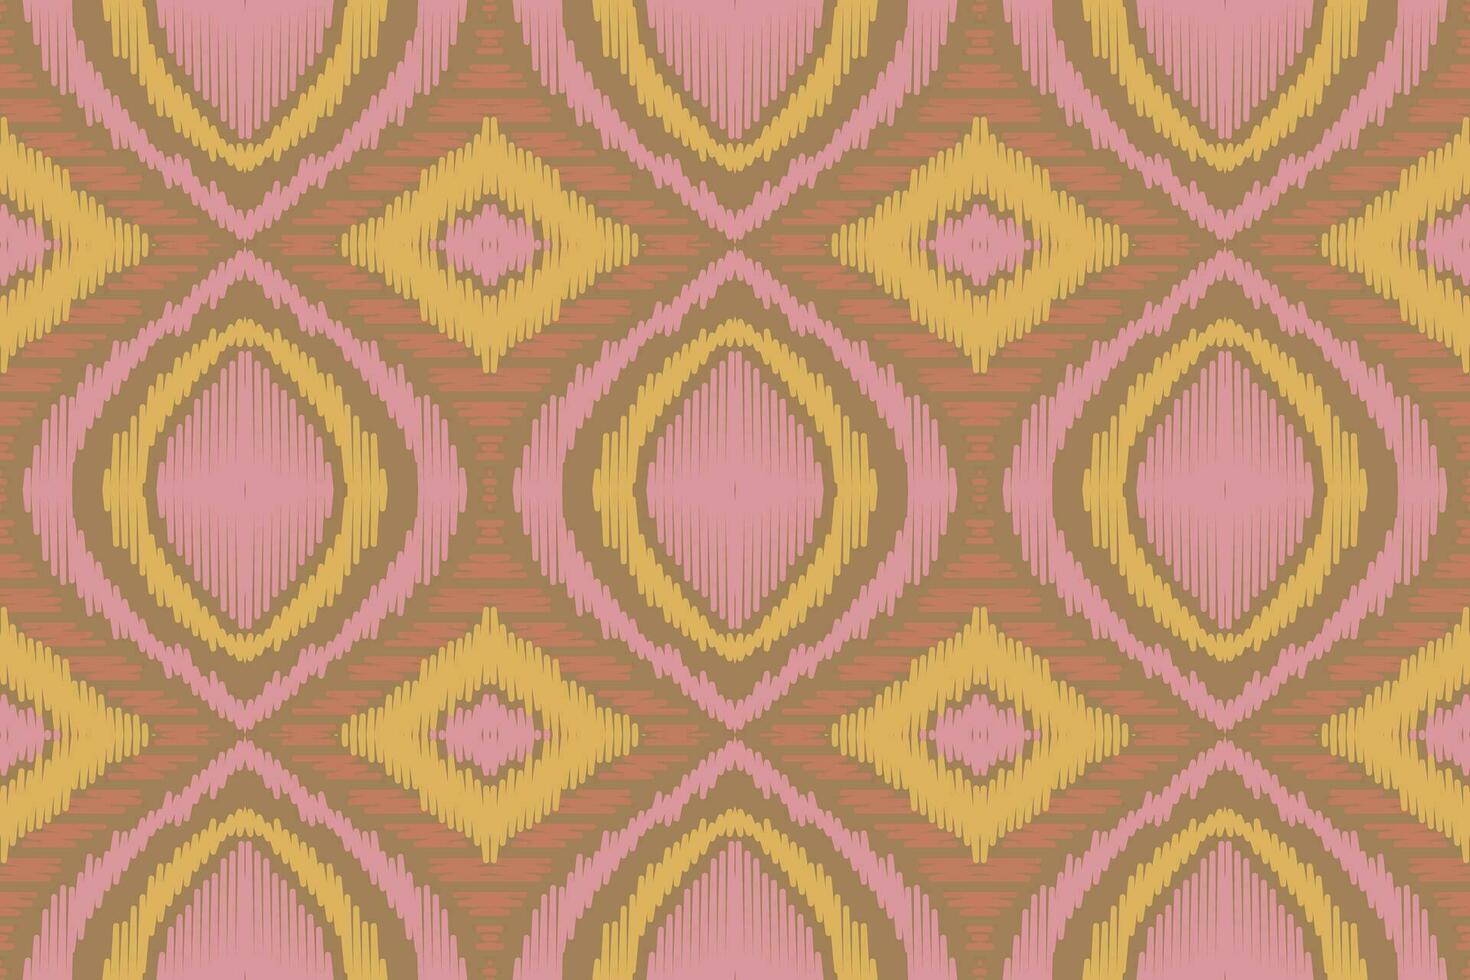 Ikat Damask Embroidery Background. Ikat Flower Geometric Ethnic Oriental Pattern Traditional. Ikat Aztec Style Abstract Design for Print Texture,fabric,saree,sari,carpet. vector